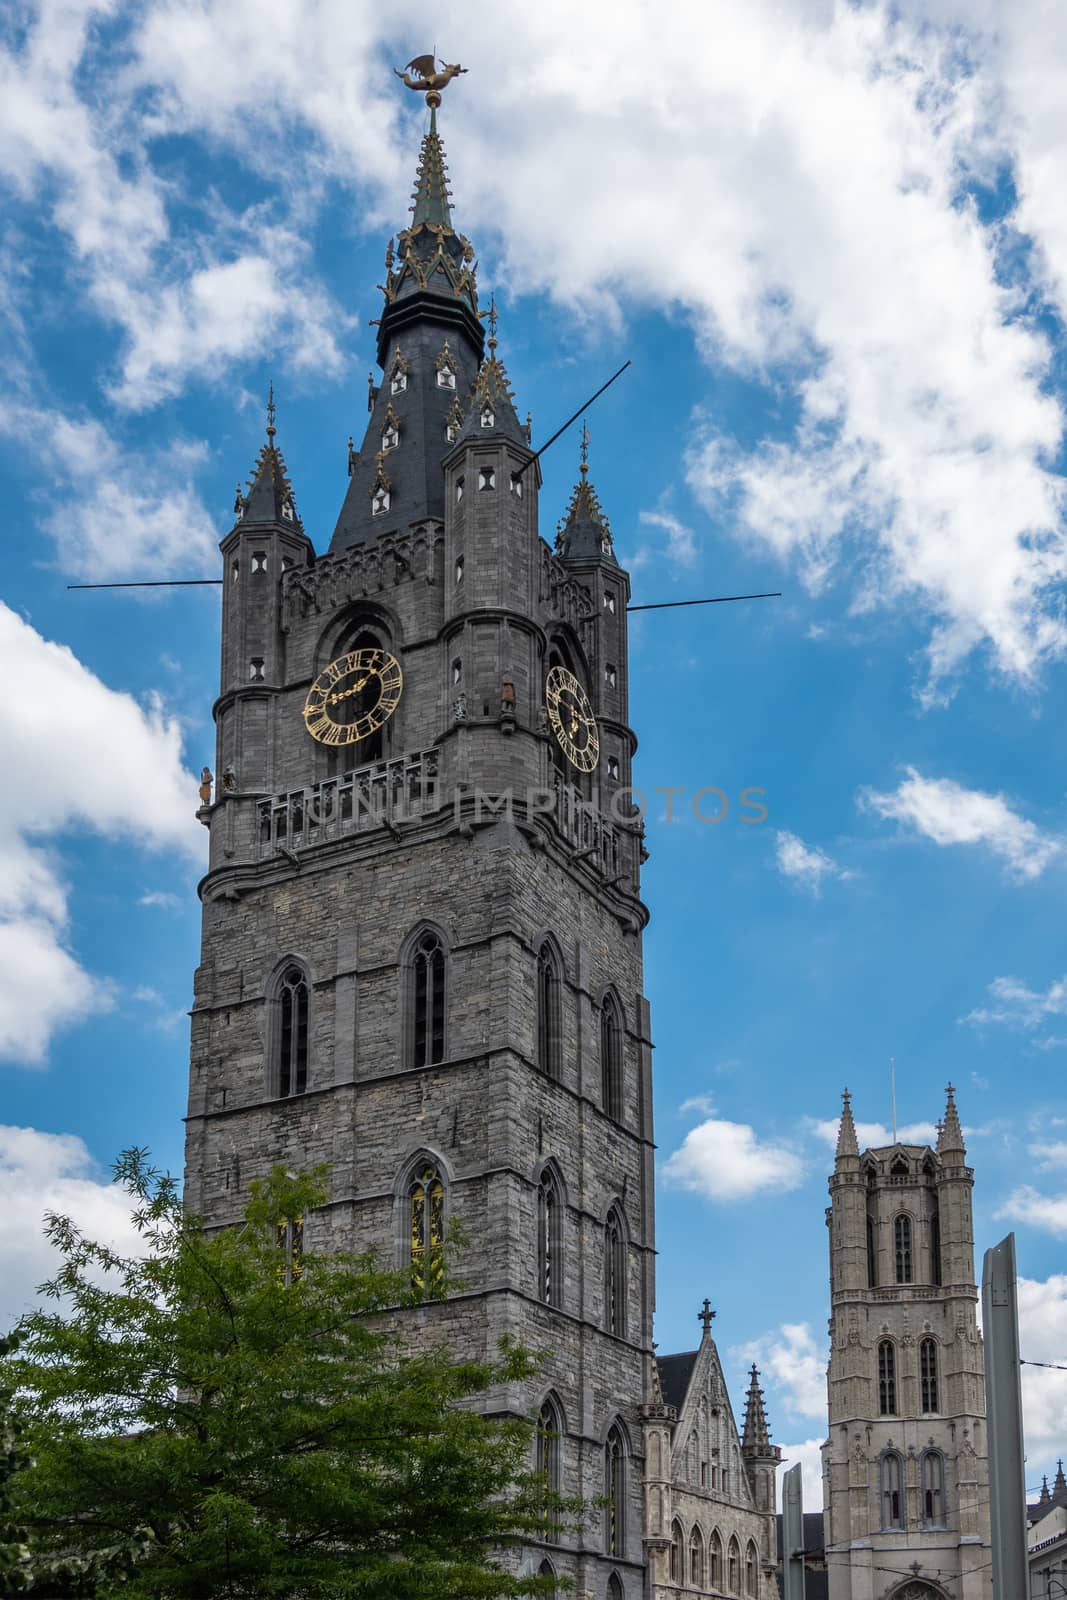 Gent, Flanders, Belgium -  June 21, 2019: Belfry clock tower with Gulden Draak dragon statue and Cathedral tower in back, all against blue sky with white clouds. Green foliage.